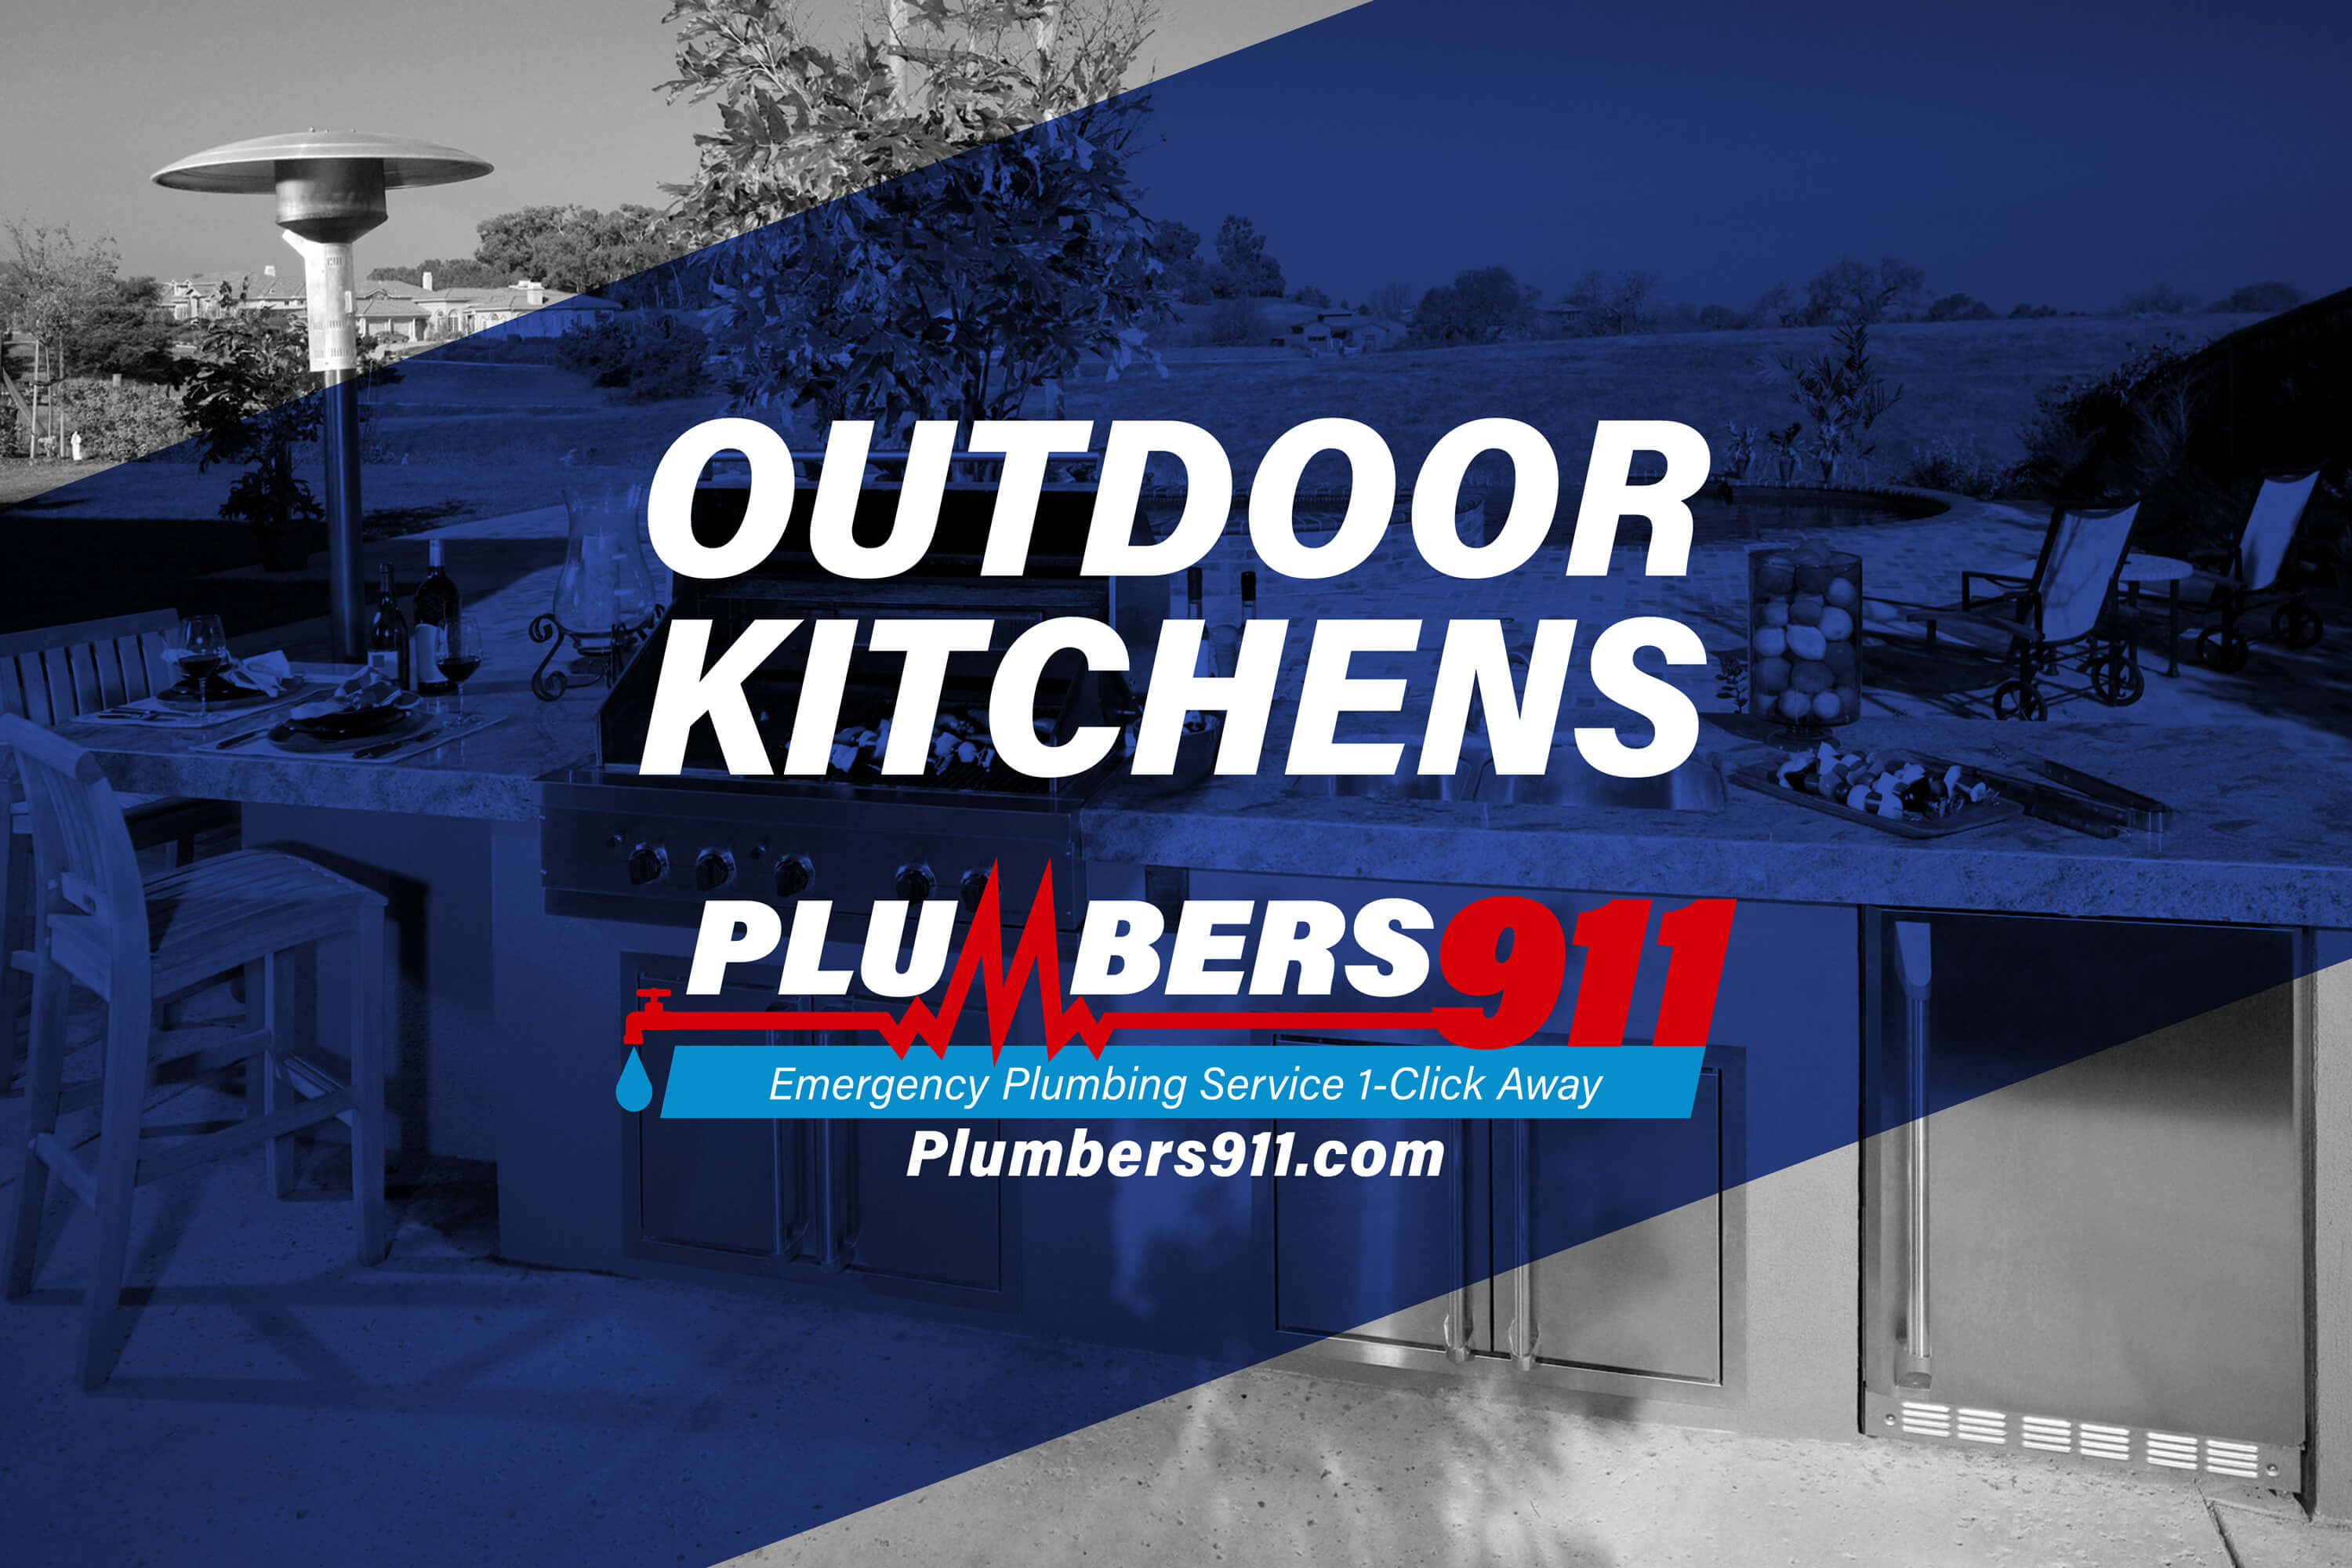 Plumbers 911 - Additional Plumbing Services - Outdoor Kitchen